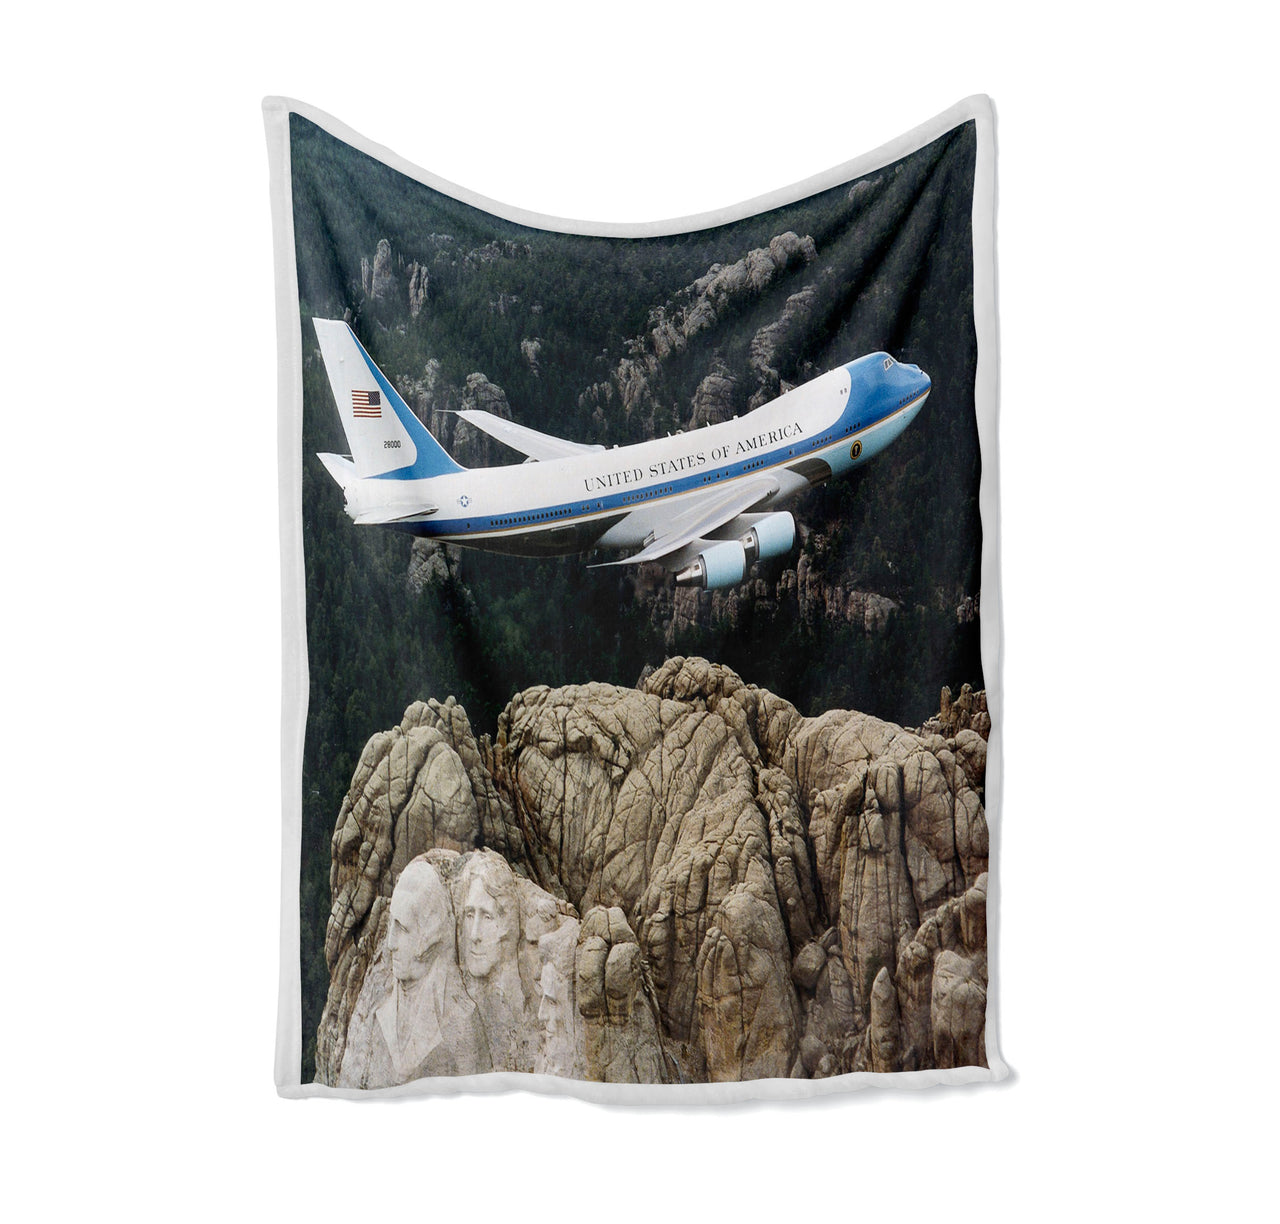 Cruising United States of America Boeing 747 Printed Pillows Designed Bed Blankets & Covers